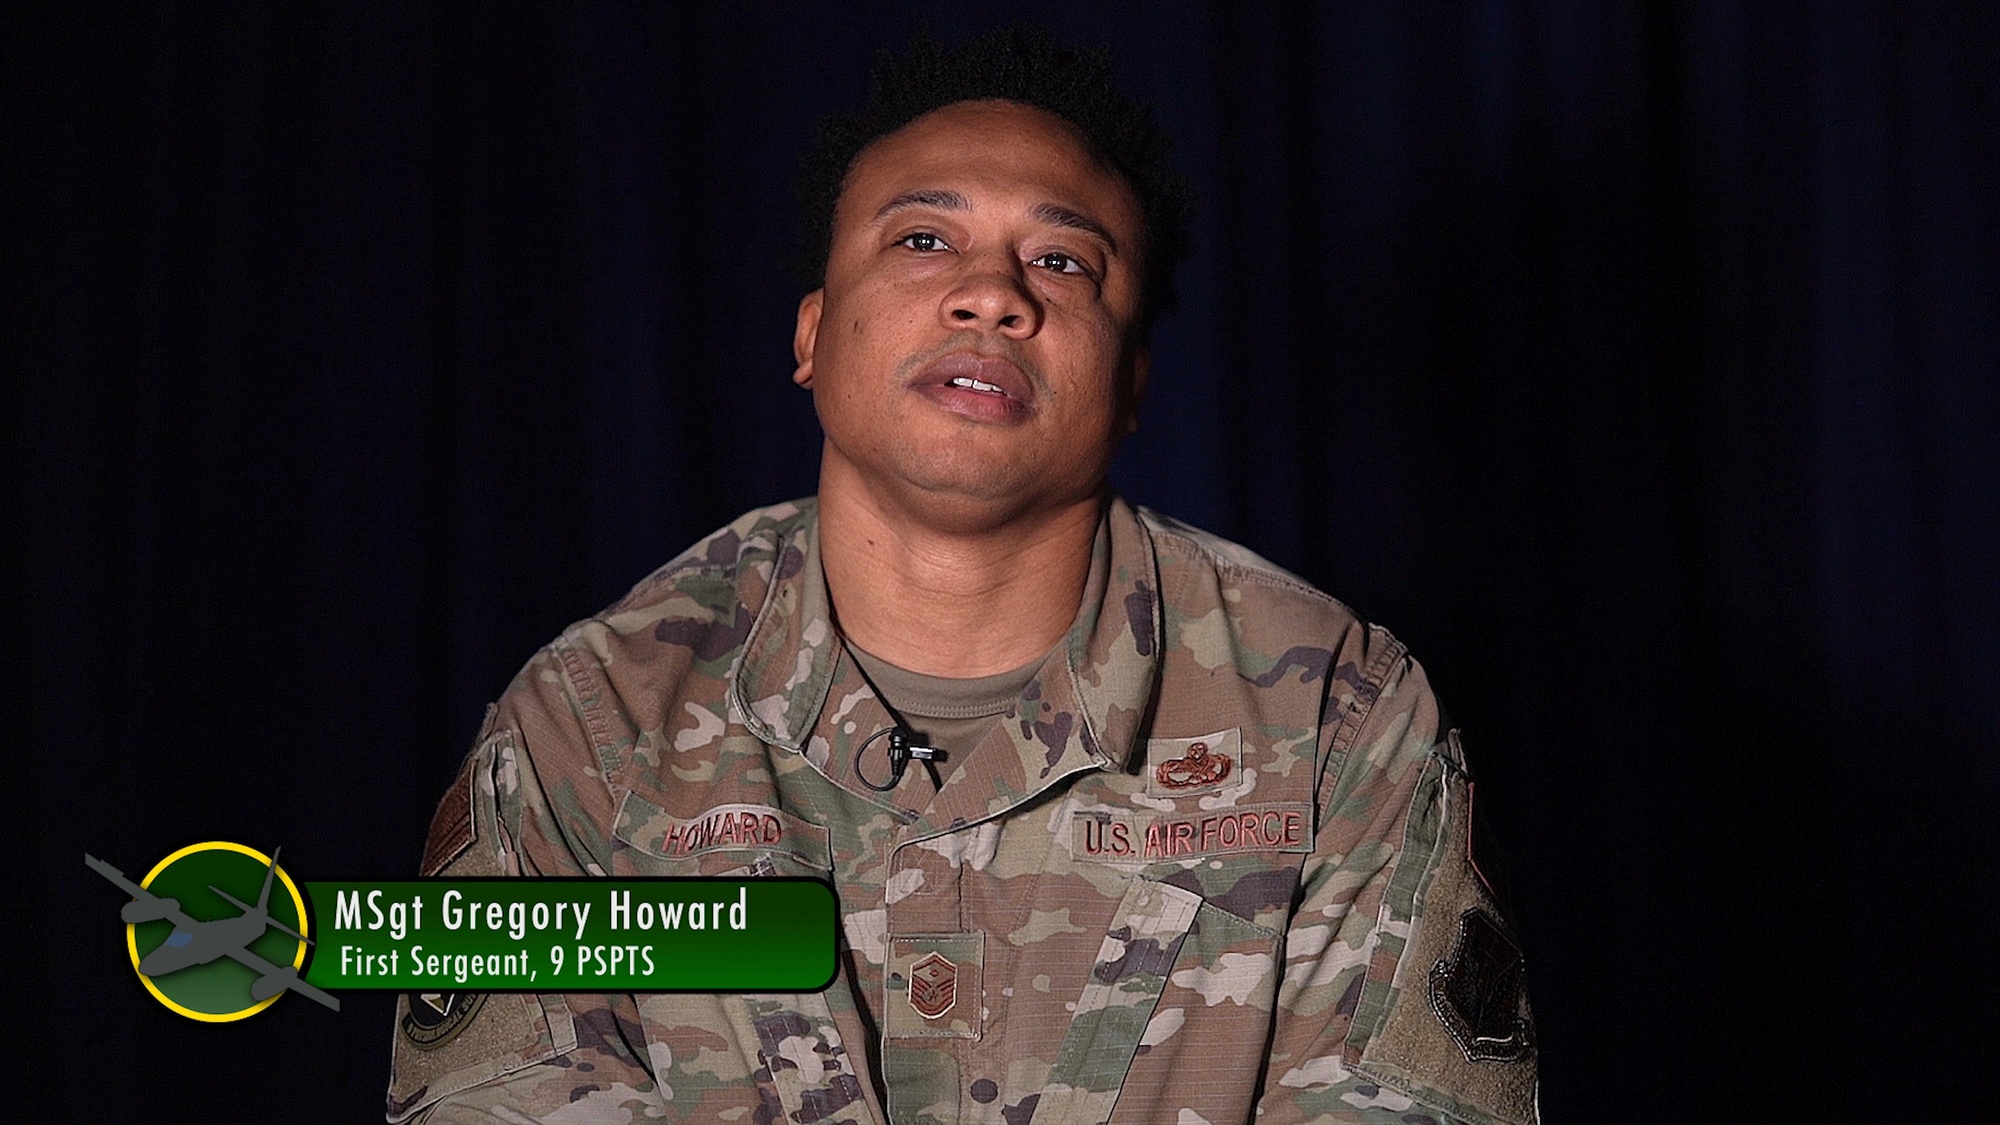 U.S. Air Force Master Sgt. Gregory Howard, 9th Physiological Support Squadron first sergeant, talks about his experience as a first sergeant. Howard emphasizes the importance of making intentional conversations with people as a way to take care of them. (U.S. Air Force video by Senior Airman Juliana Londono)